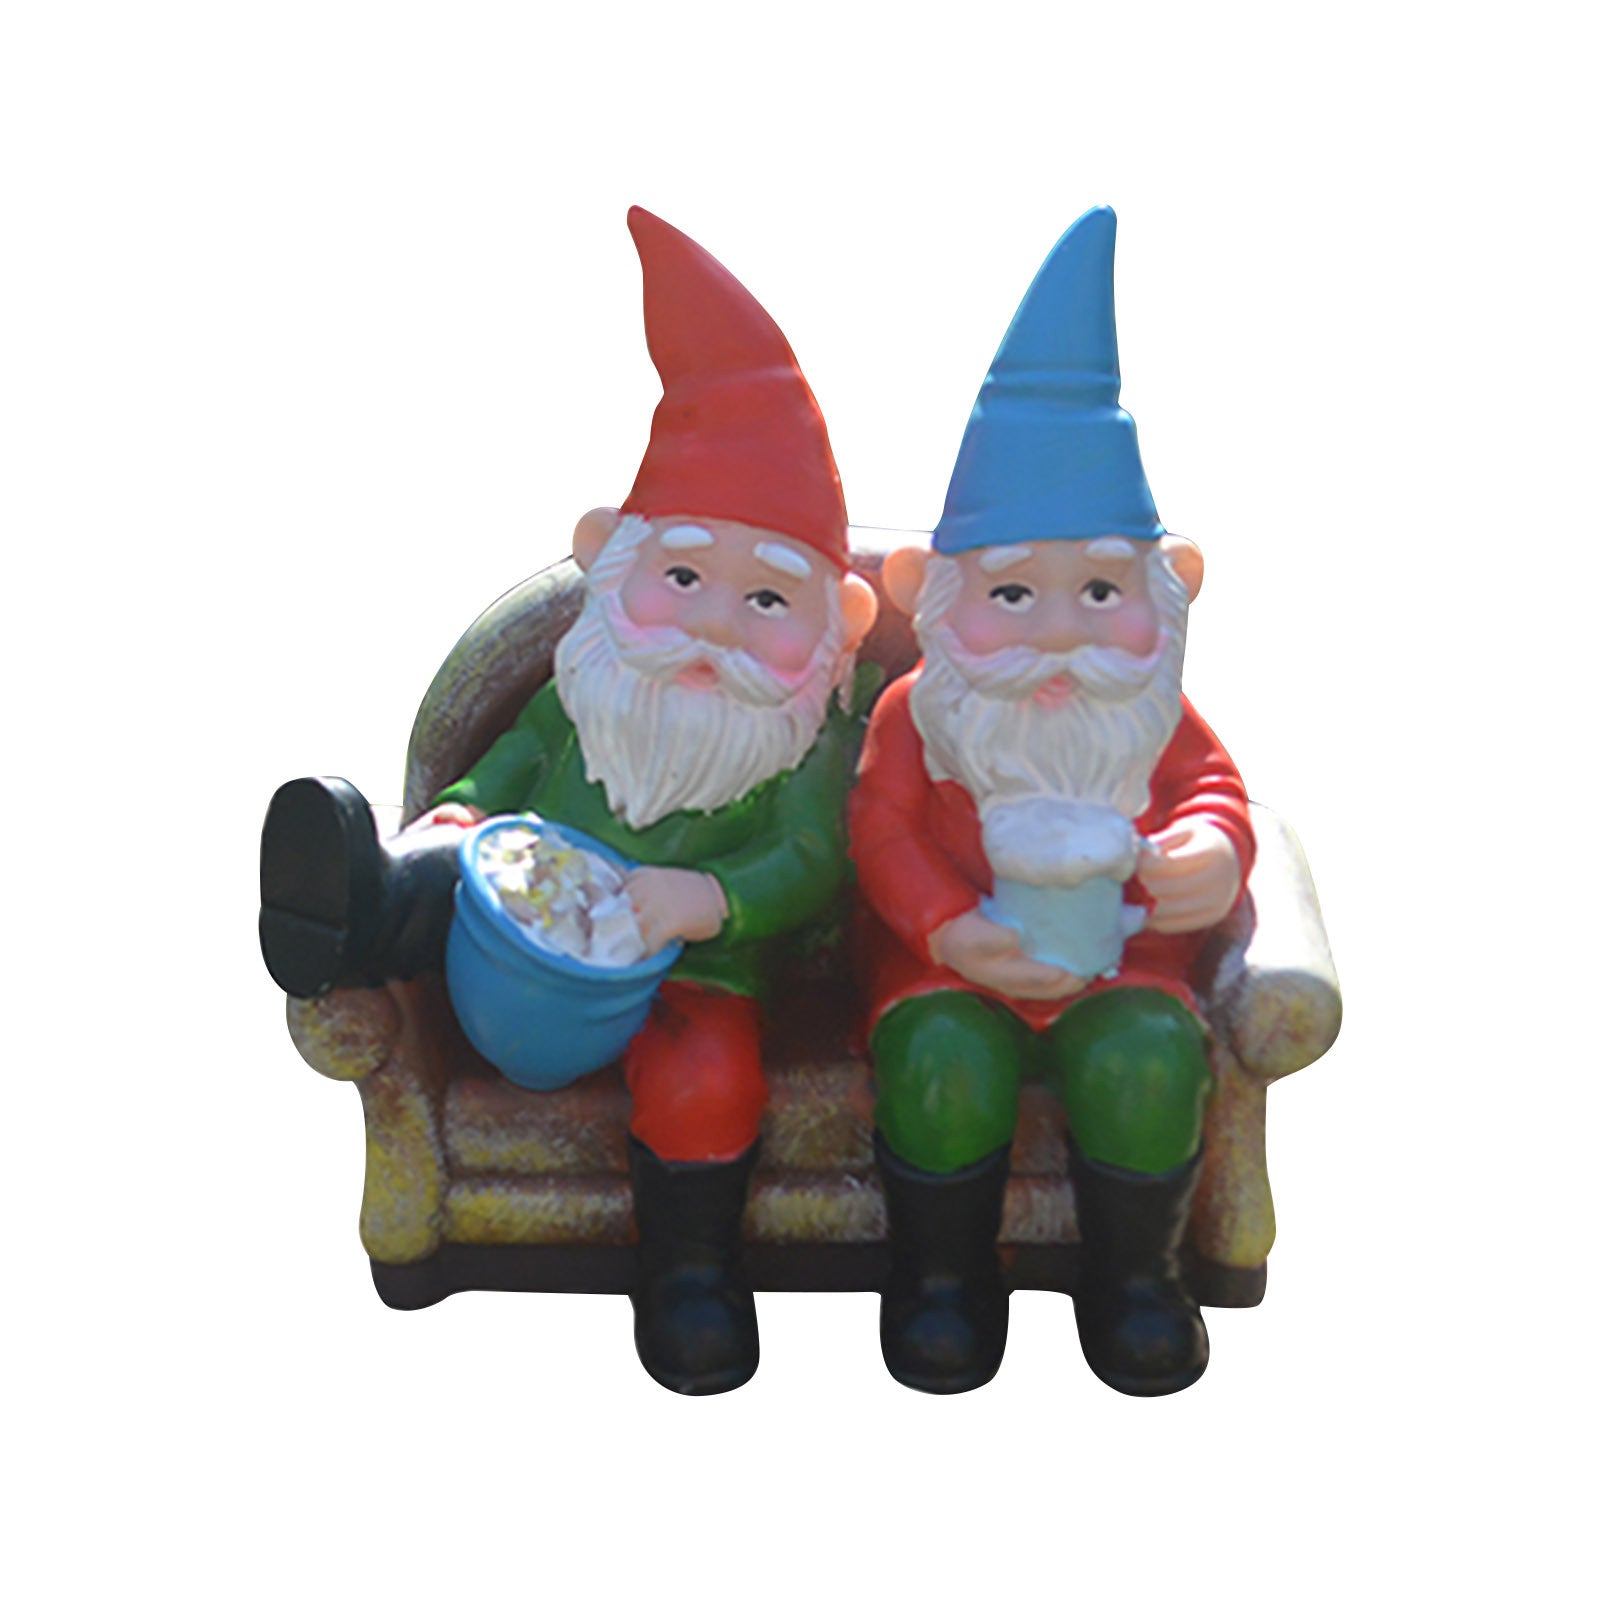 Resin Crafts Drinking Beer Old Man Ornaments, Garden Gnomes, Outdoor garden Gnomes, Resin Craft Old Man, Garden Gnomes Ornaments, Beer Gnomes, Drinking Beer Gnomes, Drinking Beer Garden Gnomes